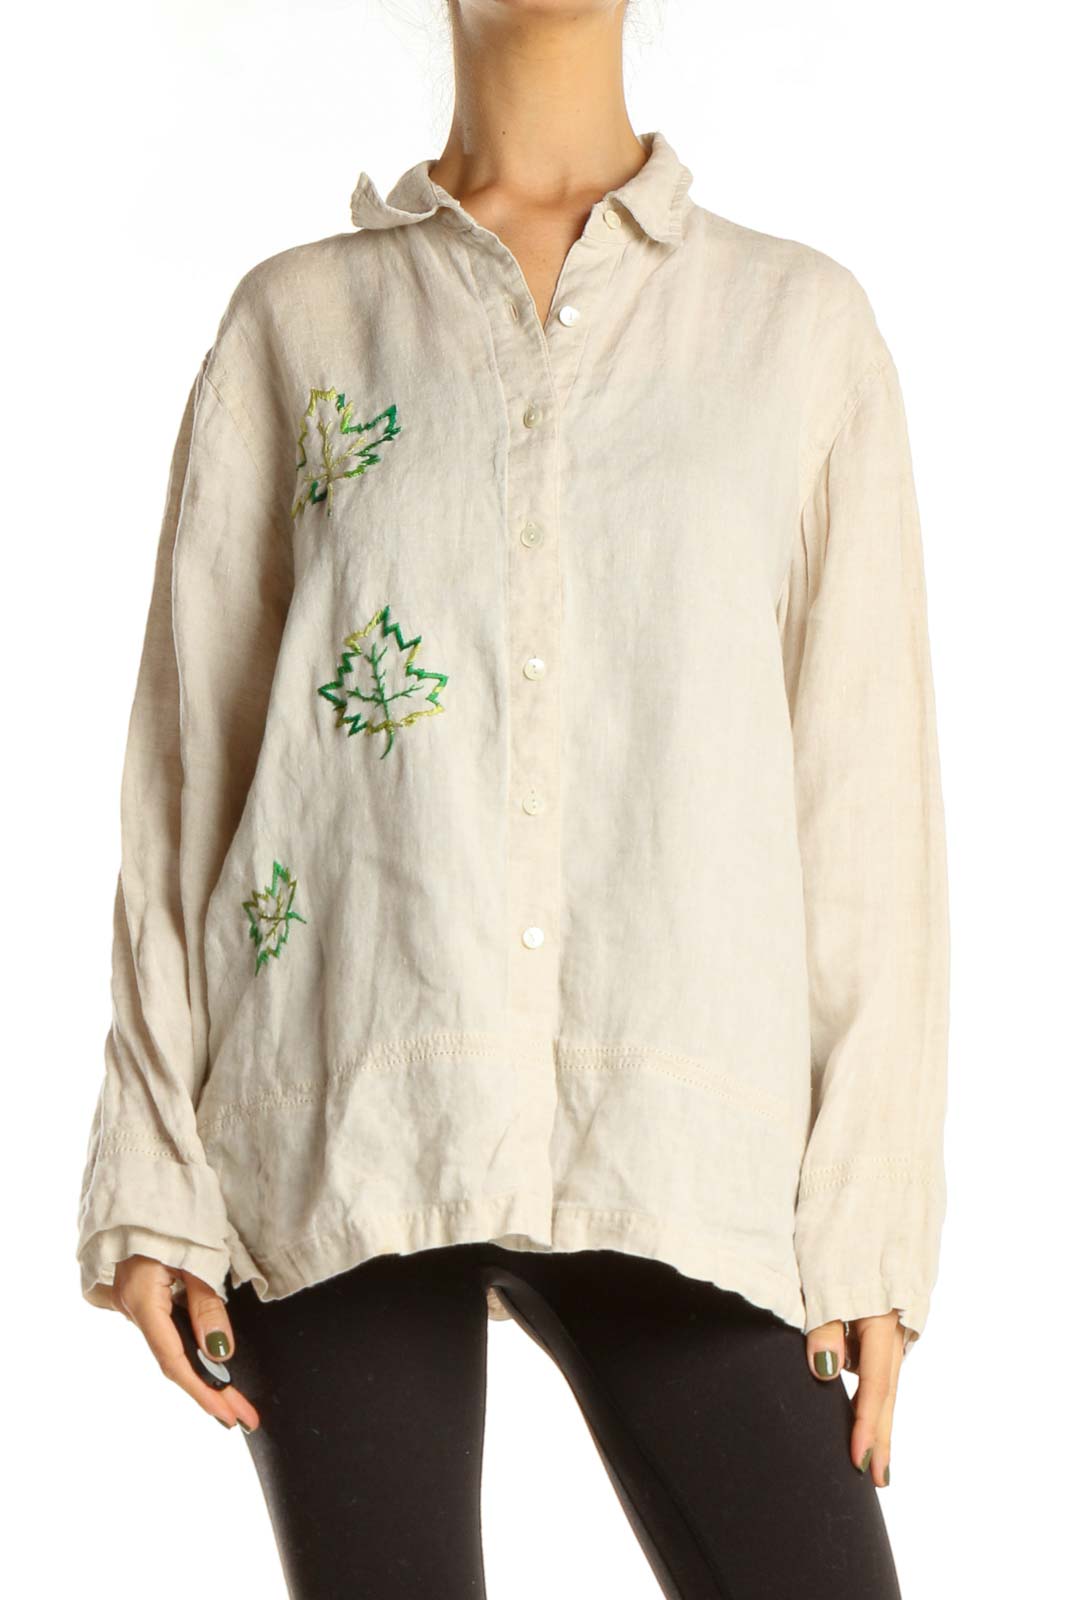 Reworked: Beige Hand Embroidered Linen Shirt with Leaves Detail Front